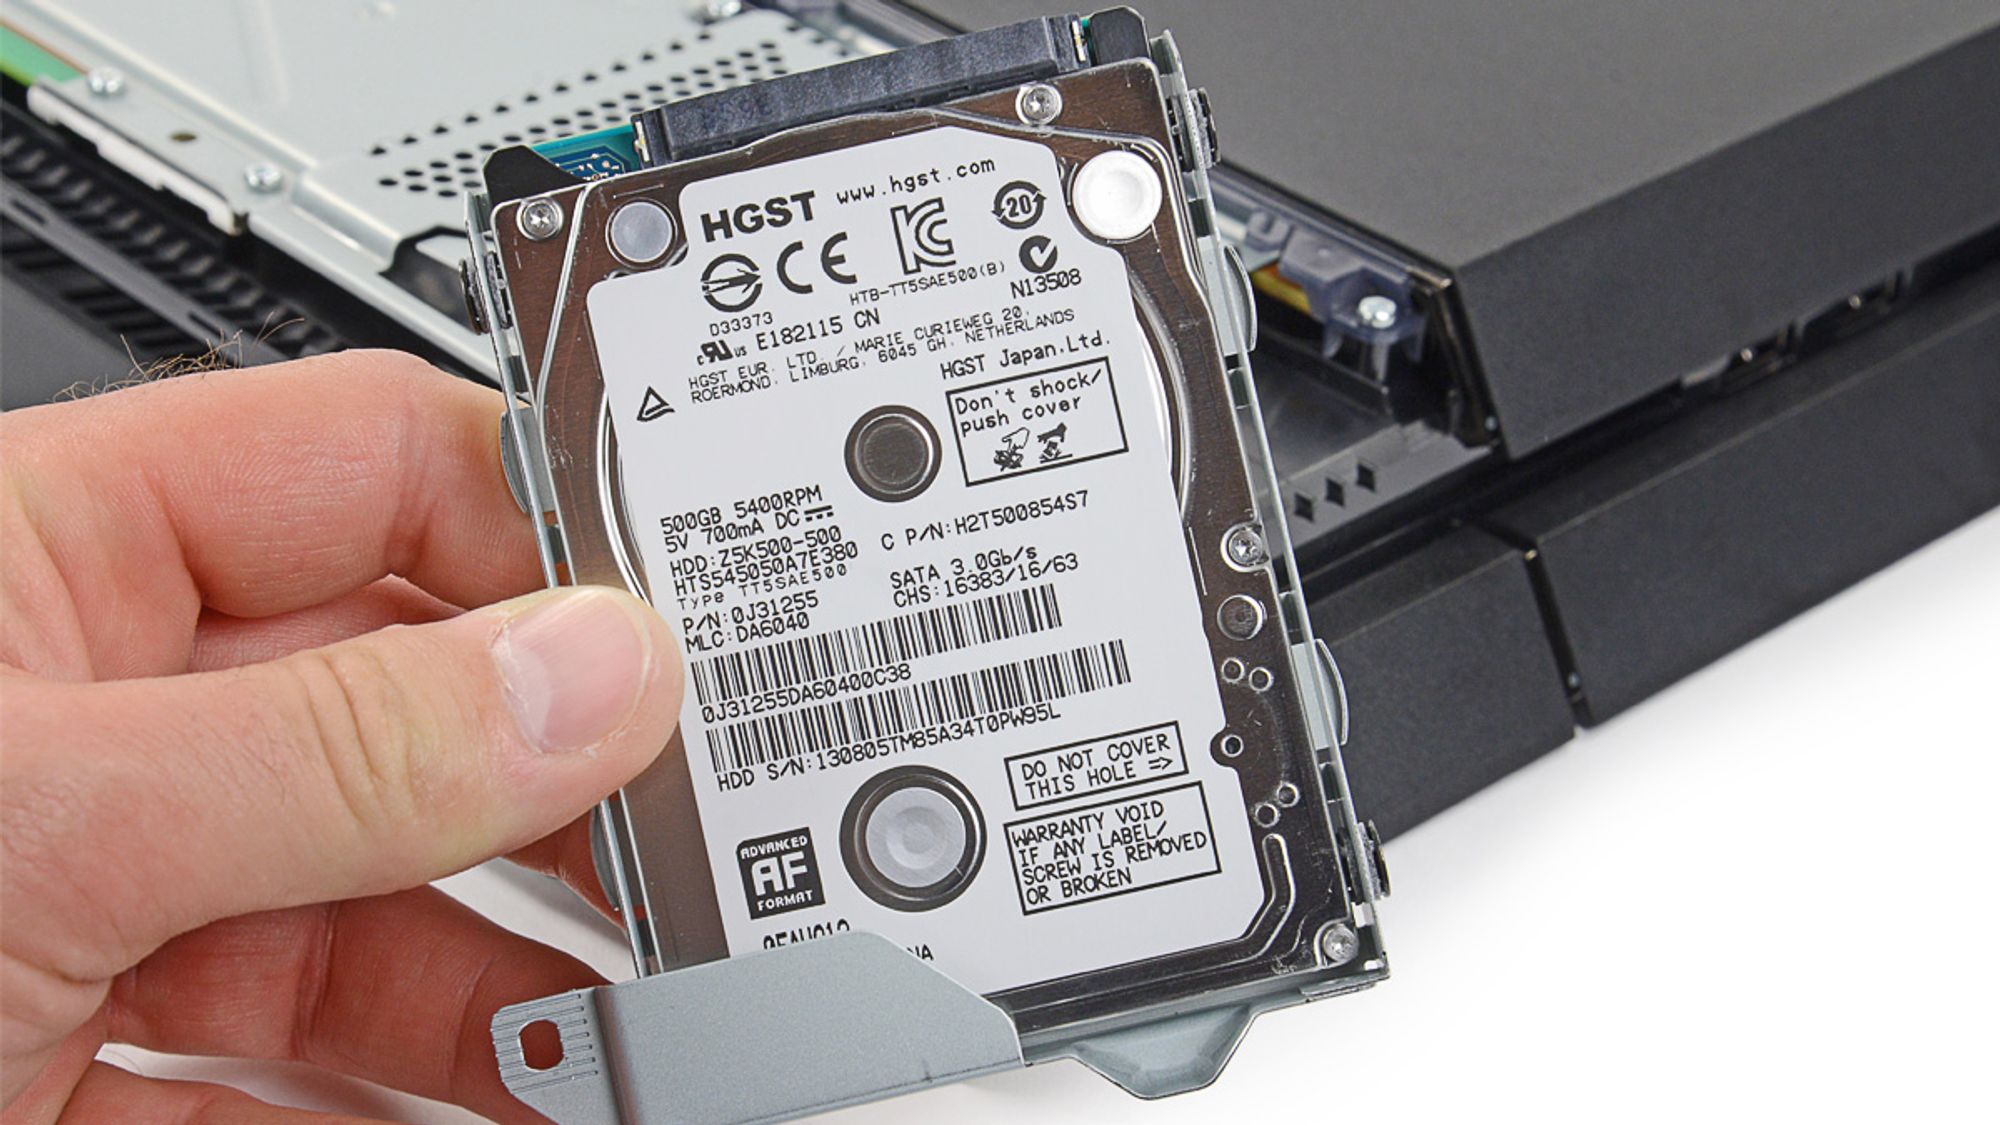 PS4 Hard Drive Specs - Small, Slow and Obsolete | PS4 Storage Expert